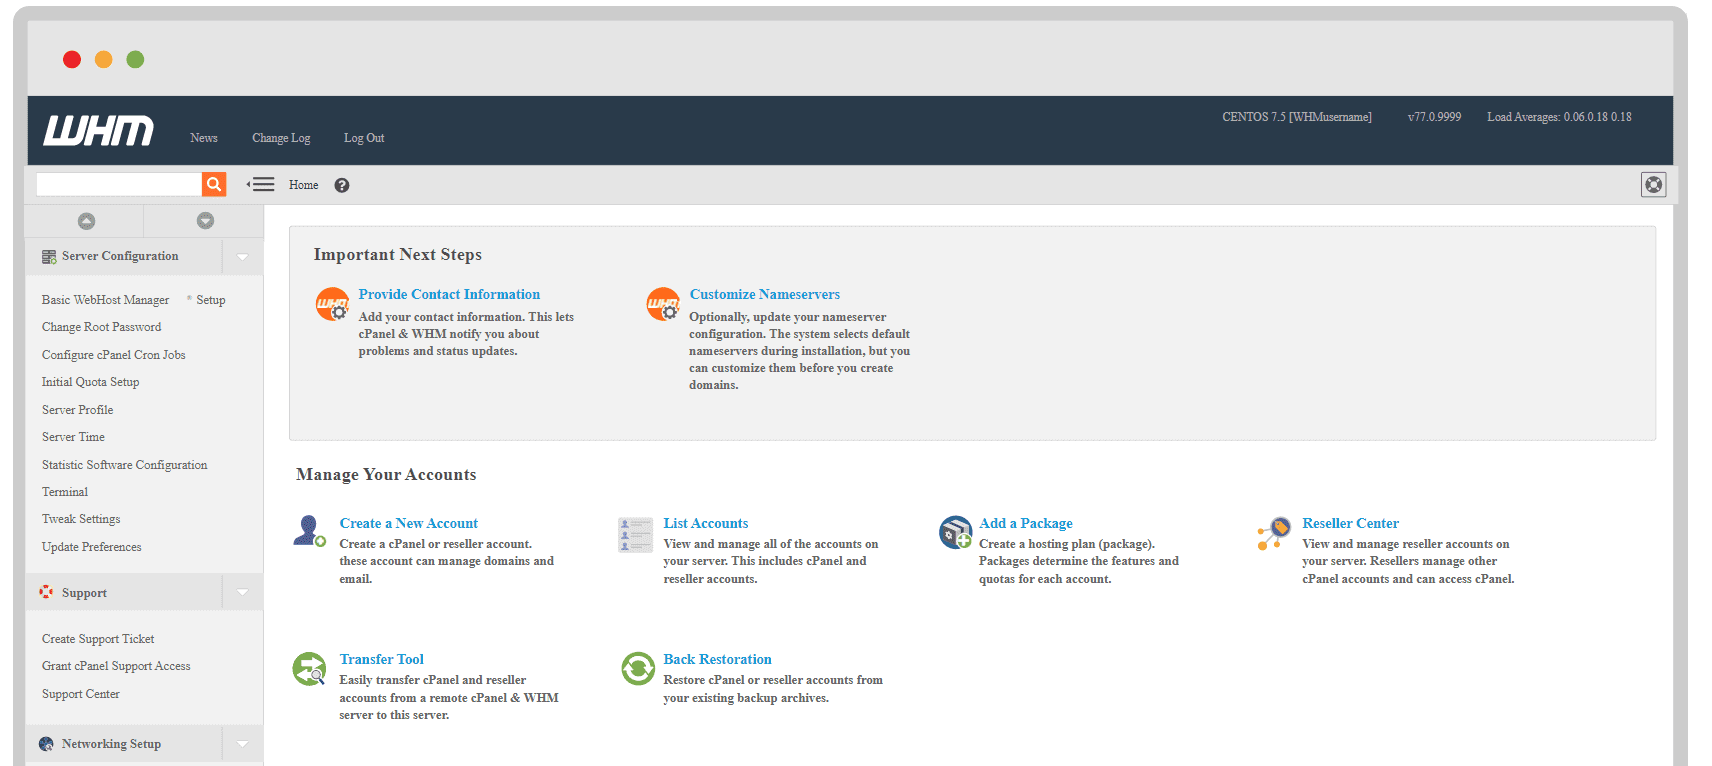 Features of cPanel 